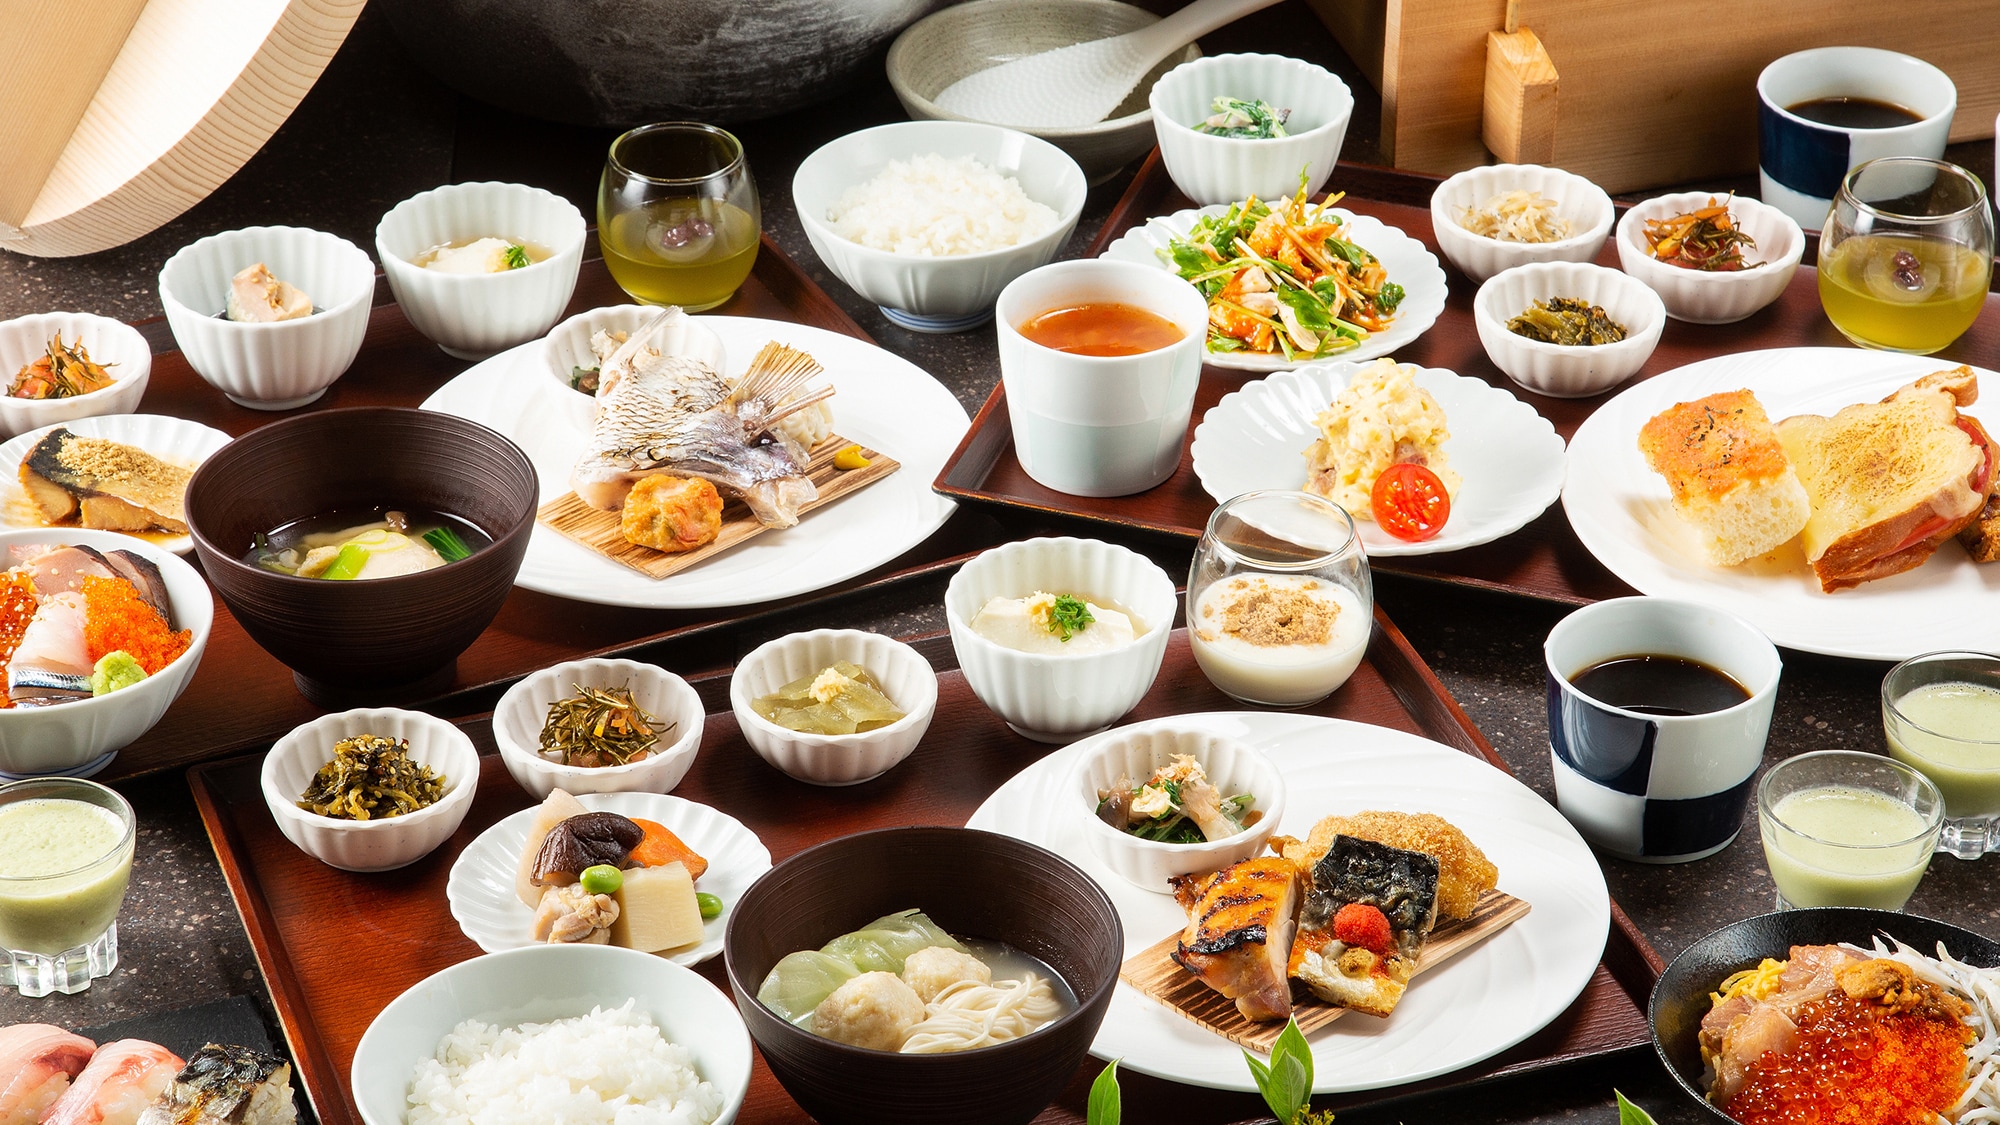 ・ We prepare breakfast that is very satisfying from the morning such as local dishes and steamed sushi.